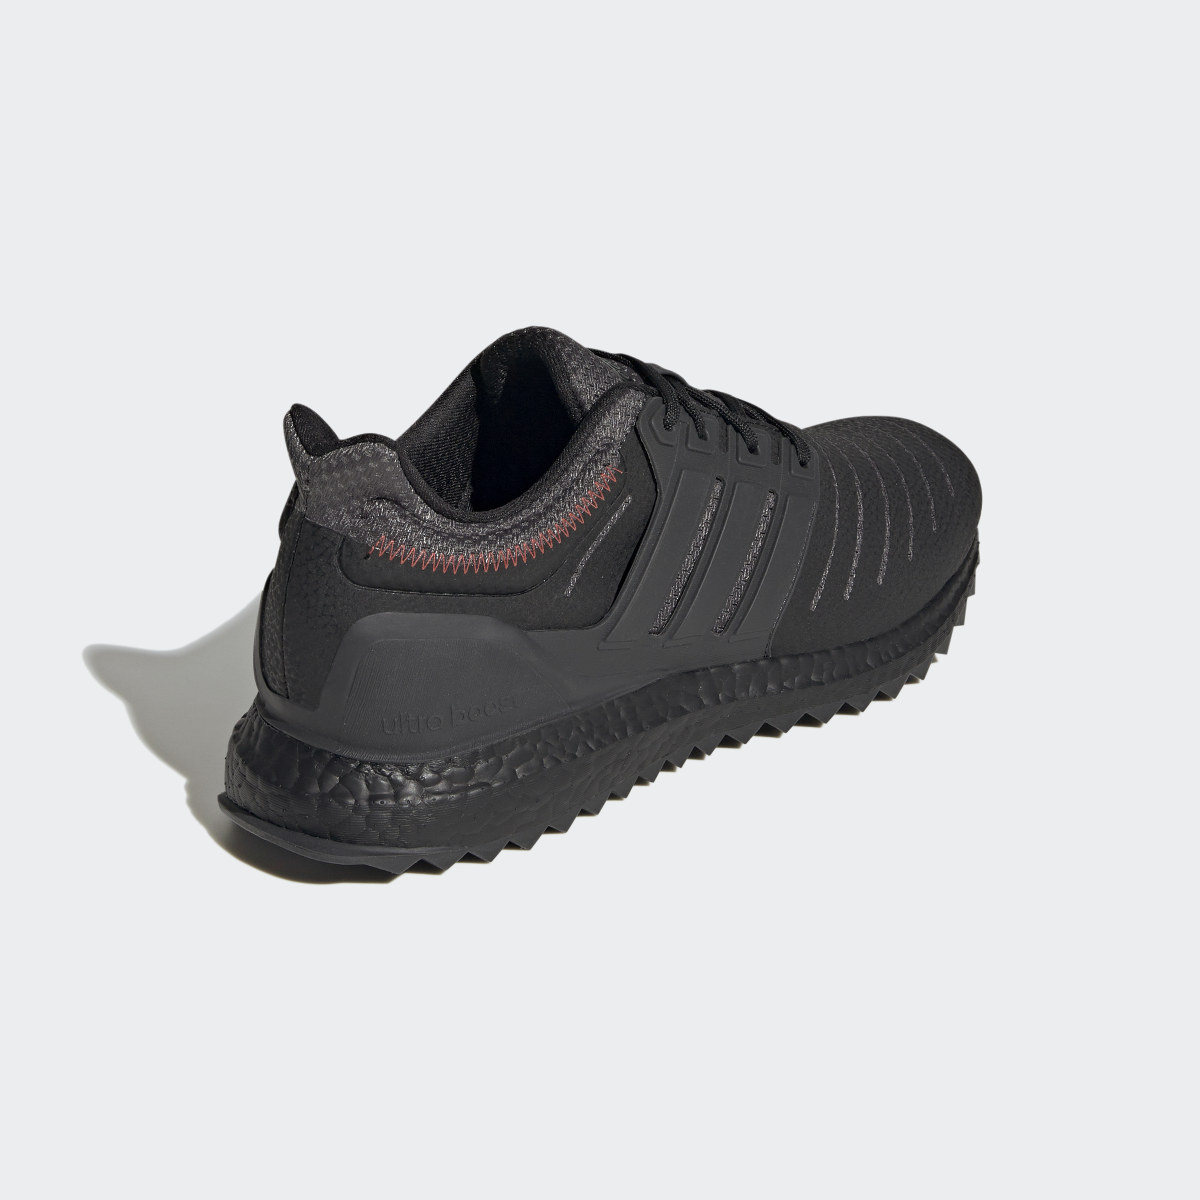 Adidas Chaussure Ultraboost DNA XXII Lifestyle Running Sportswear Capsule Collection. 6